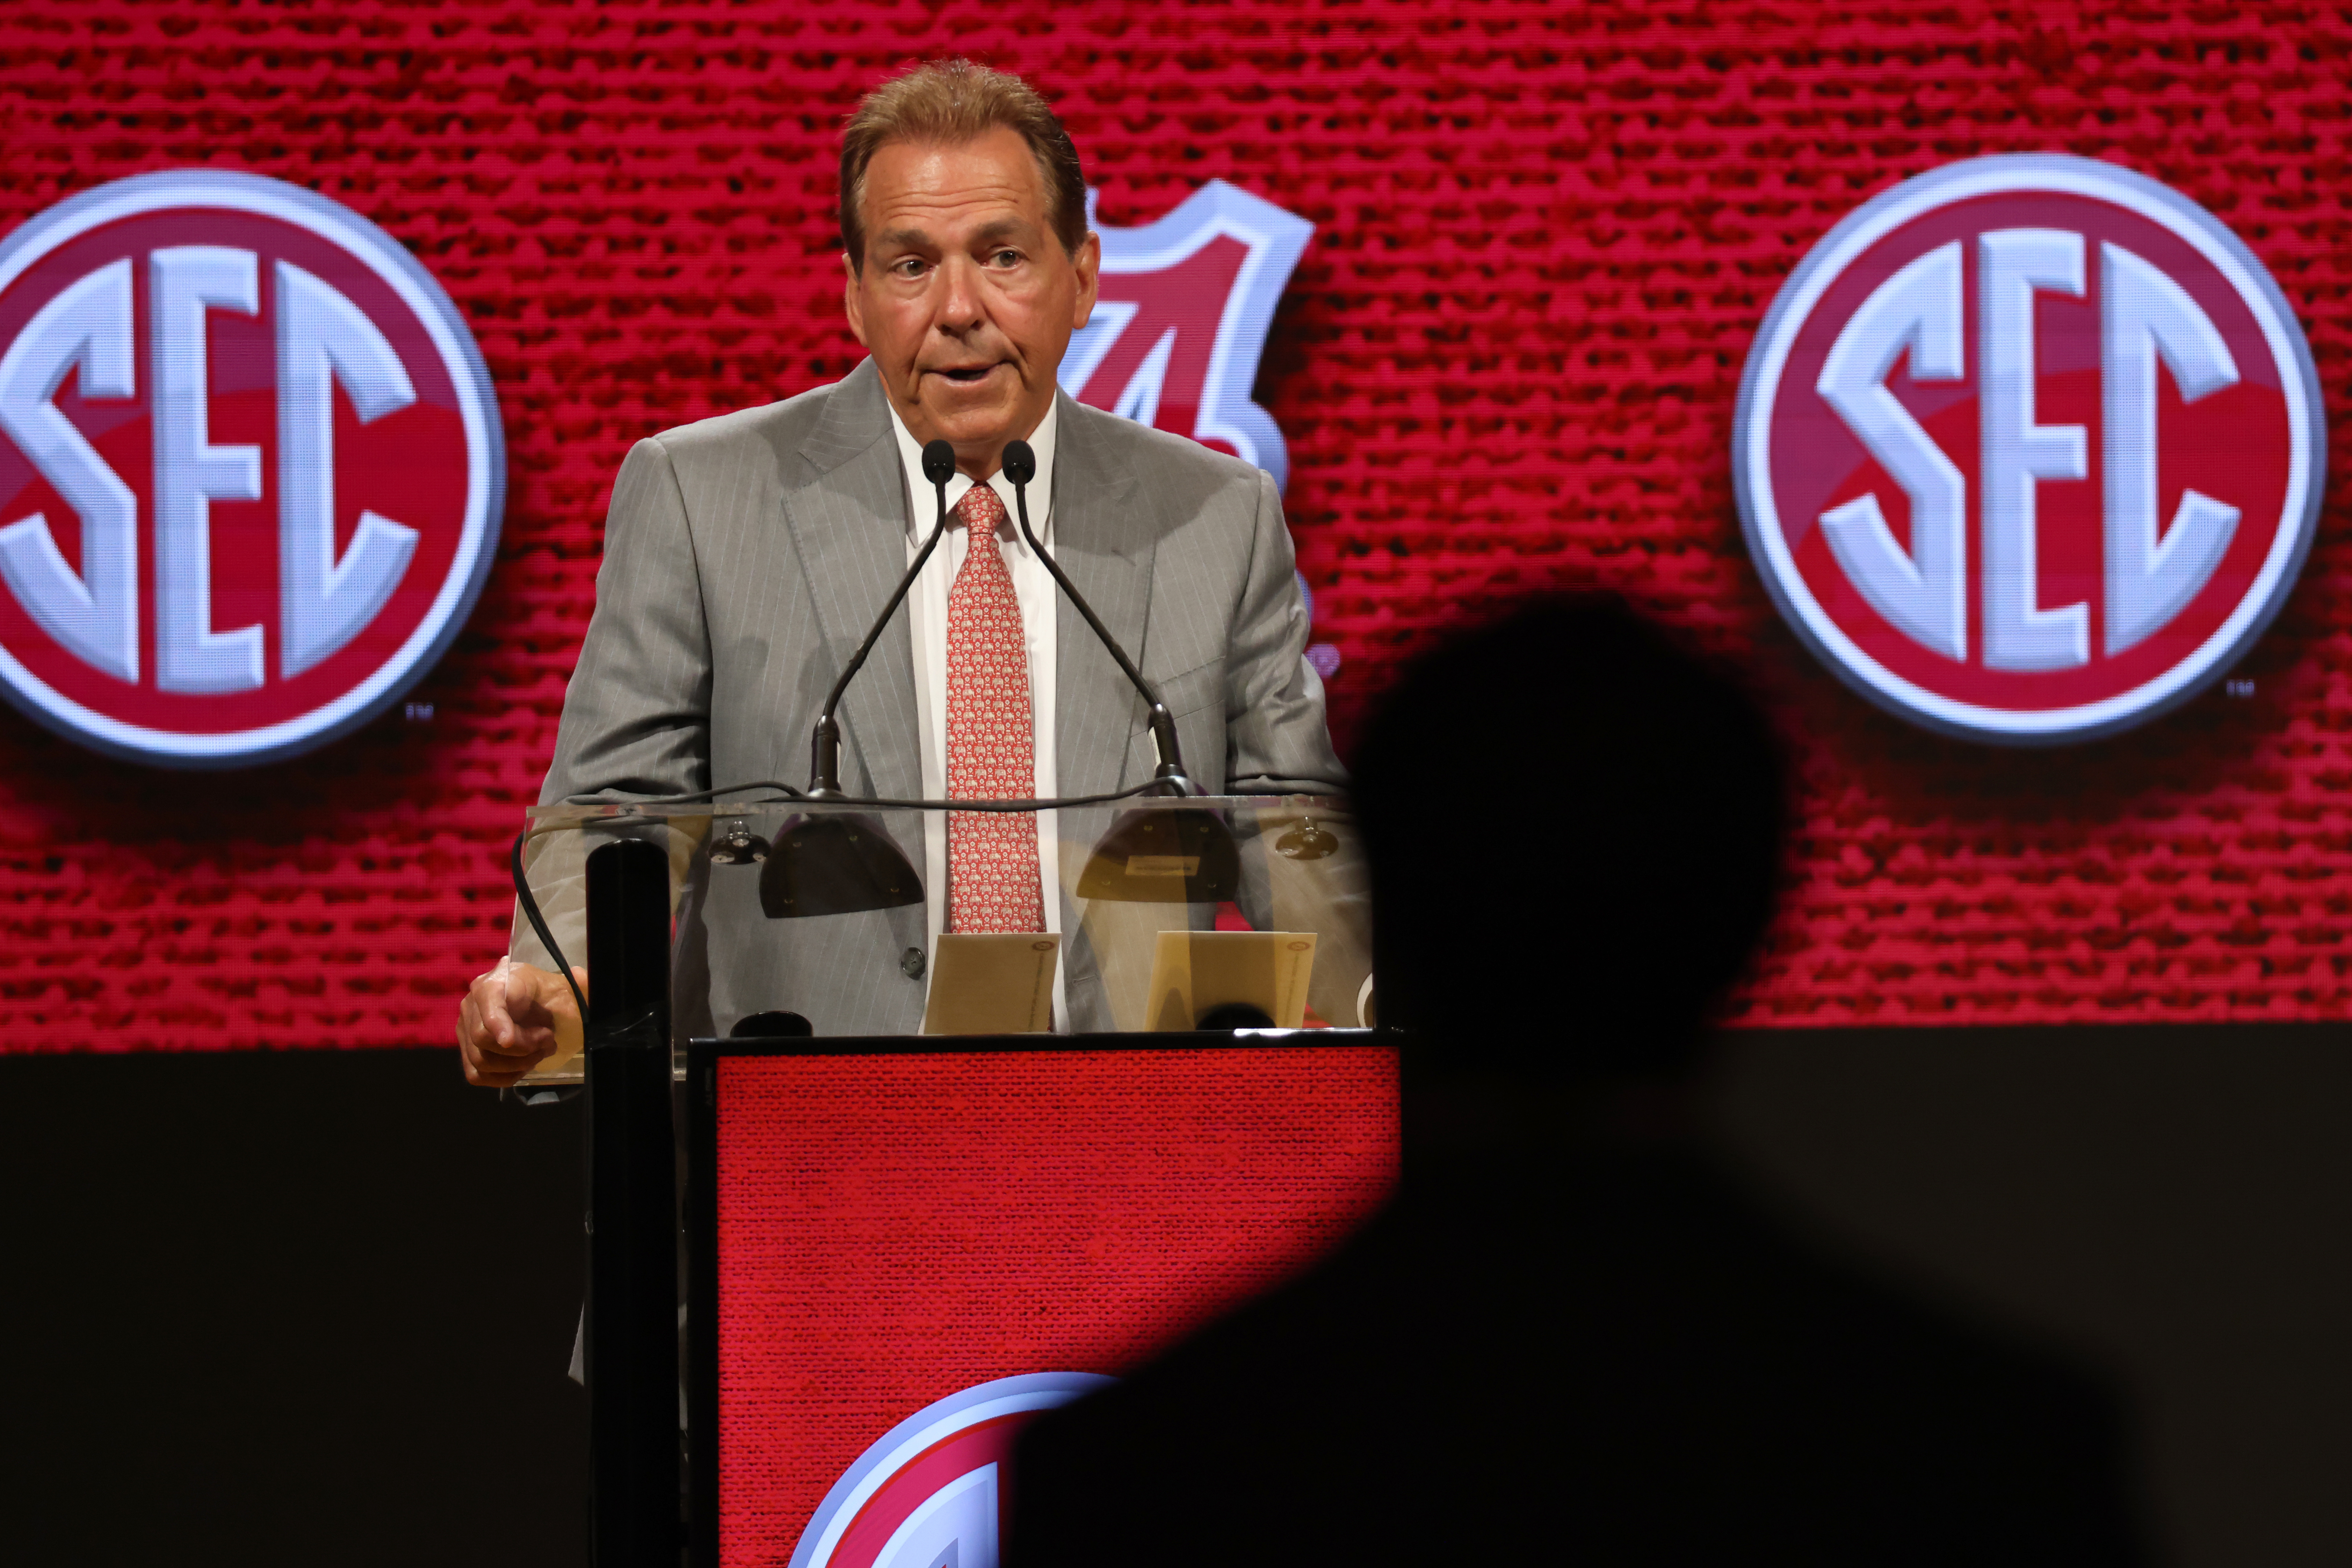 NASHVILLE, TN - JULY 19: Alabama Crimson Tide head coach Nick Saban answers a question from a media member during Southeastern Conference Football Kickoff Media Day, July 19, 2023 at the Grand Hyatt Nashville in Nashville, Tennessee. 